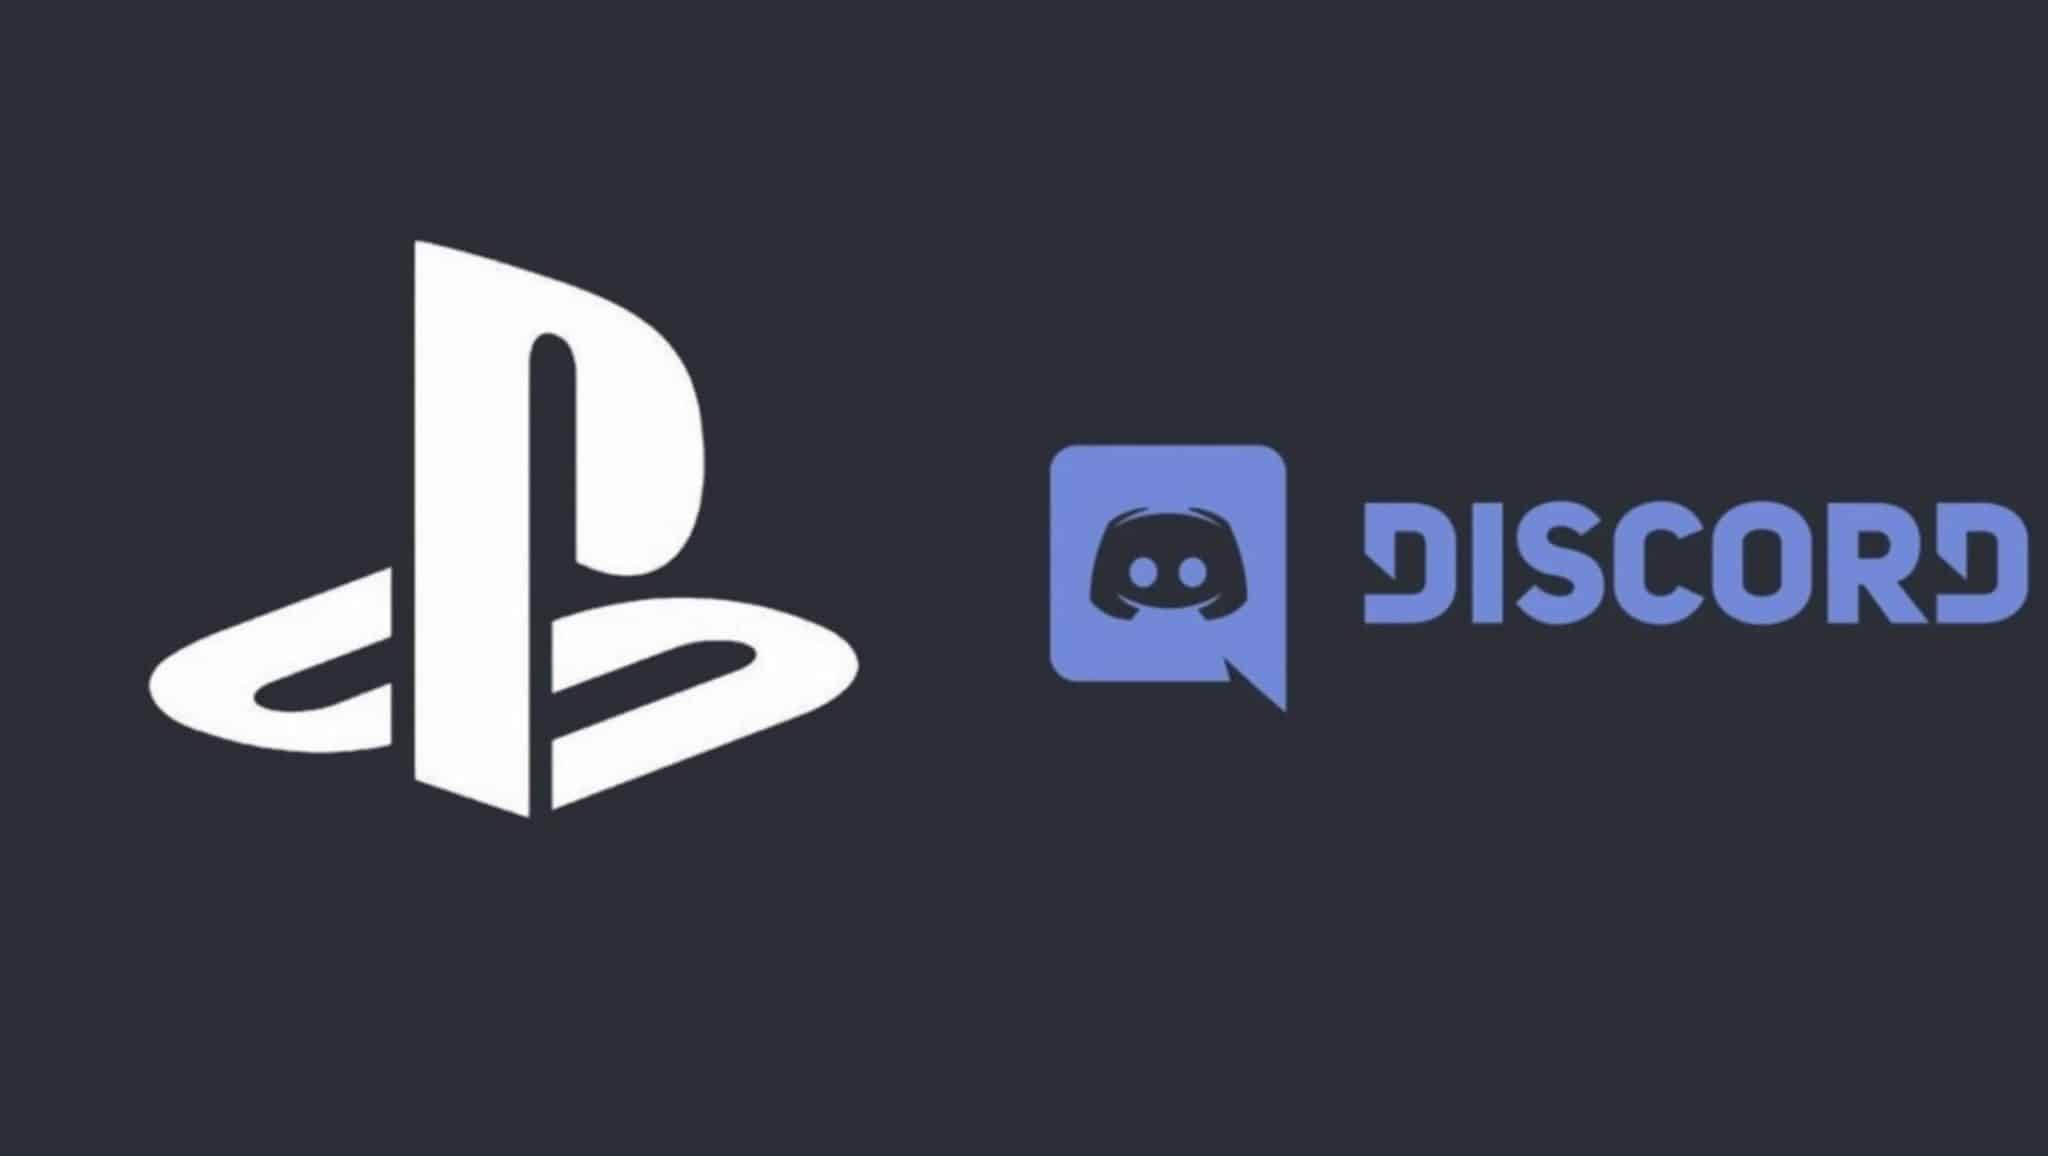 PlayStation Discord announcement